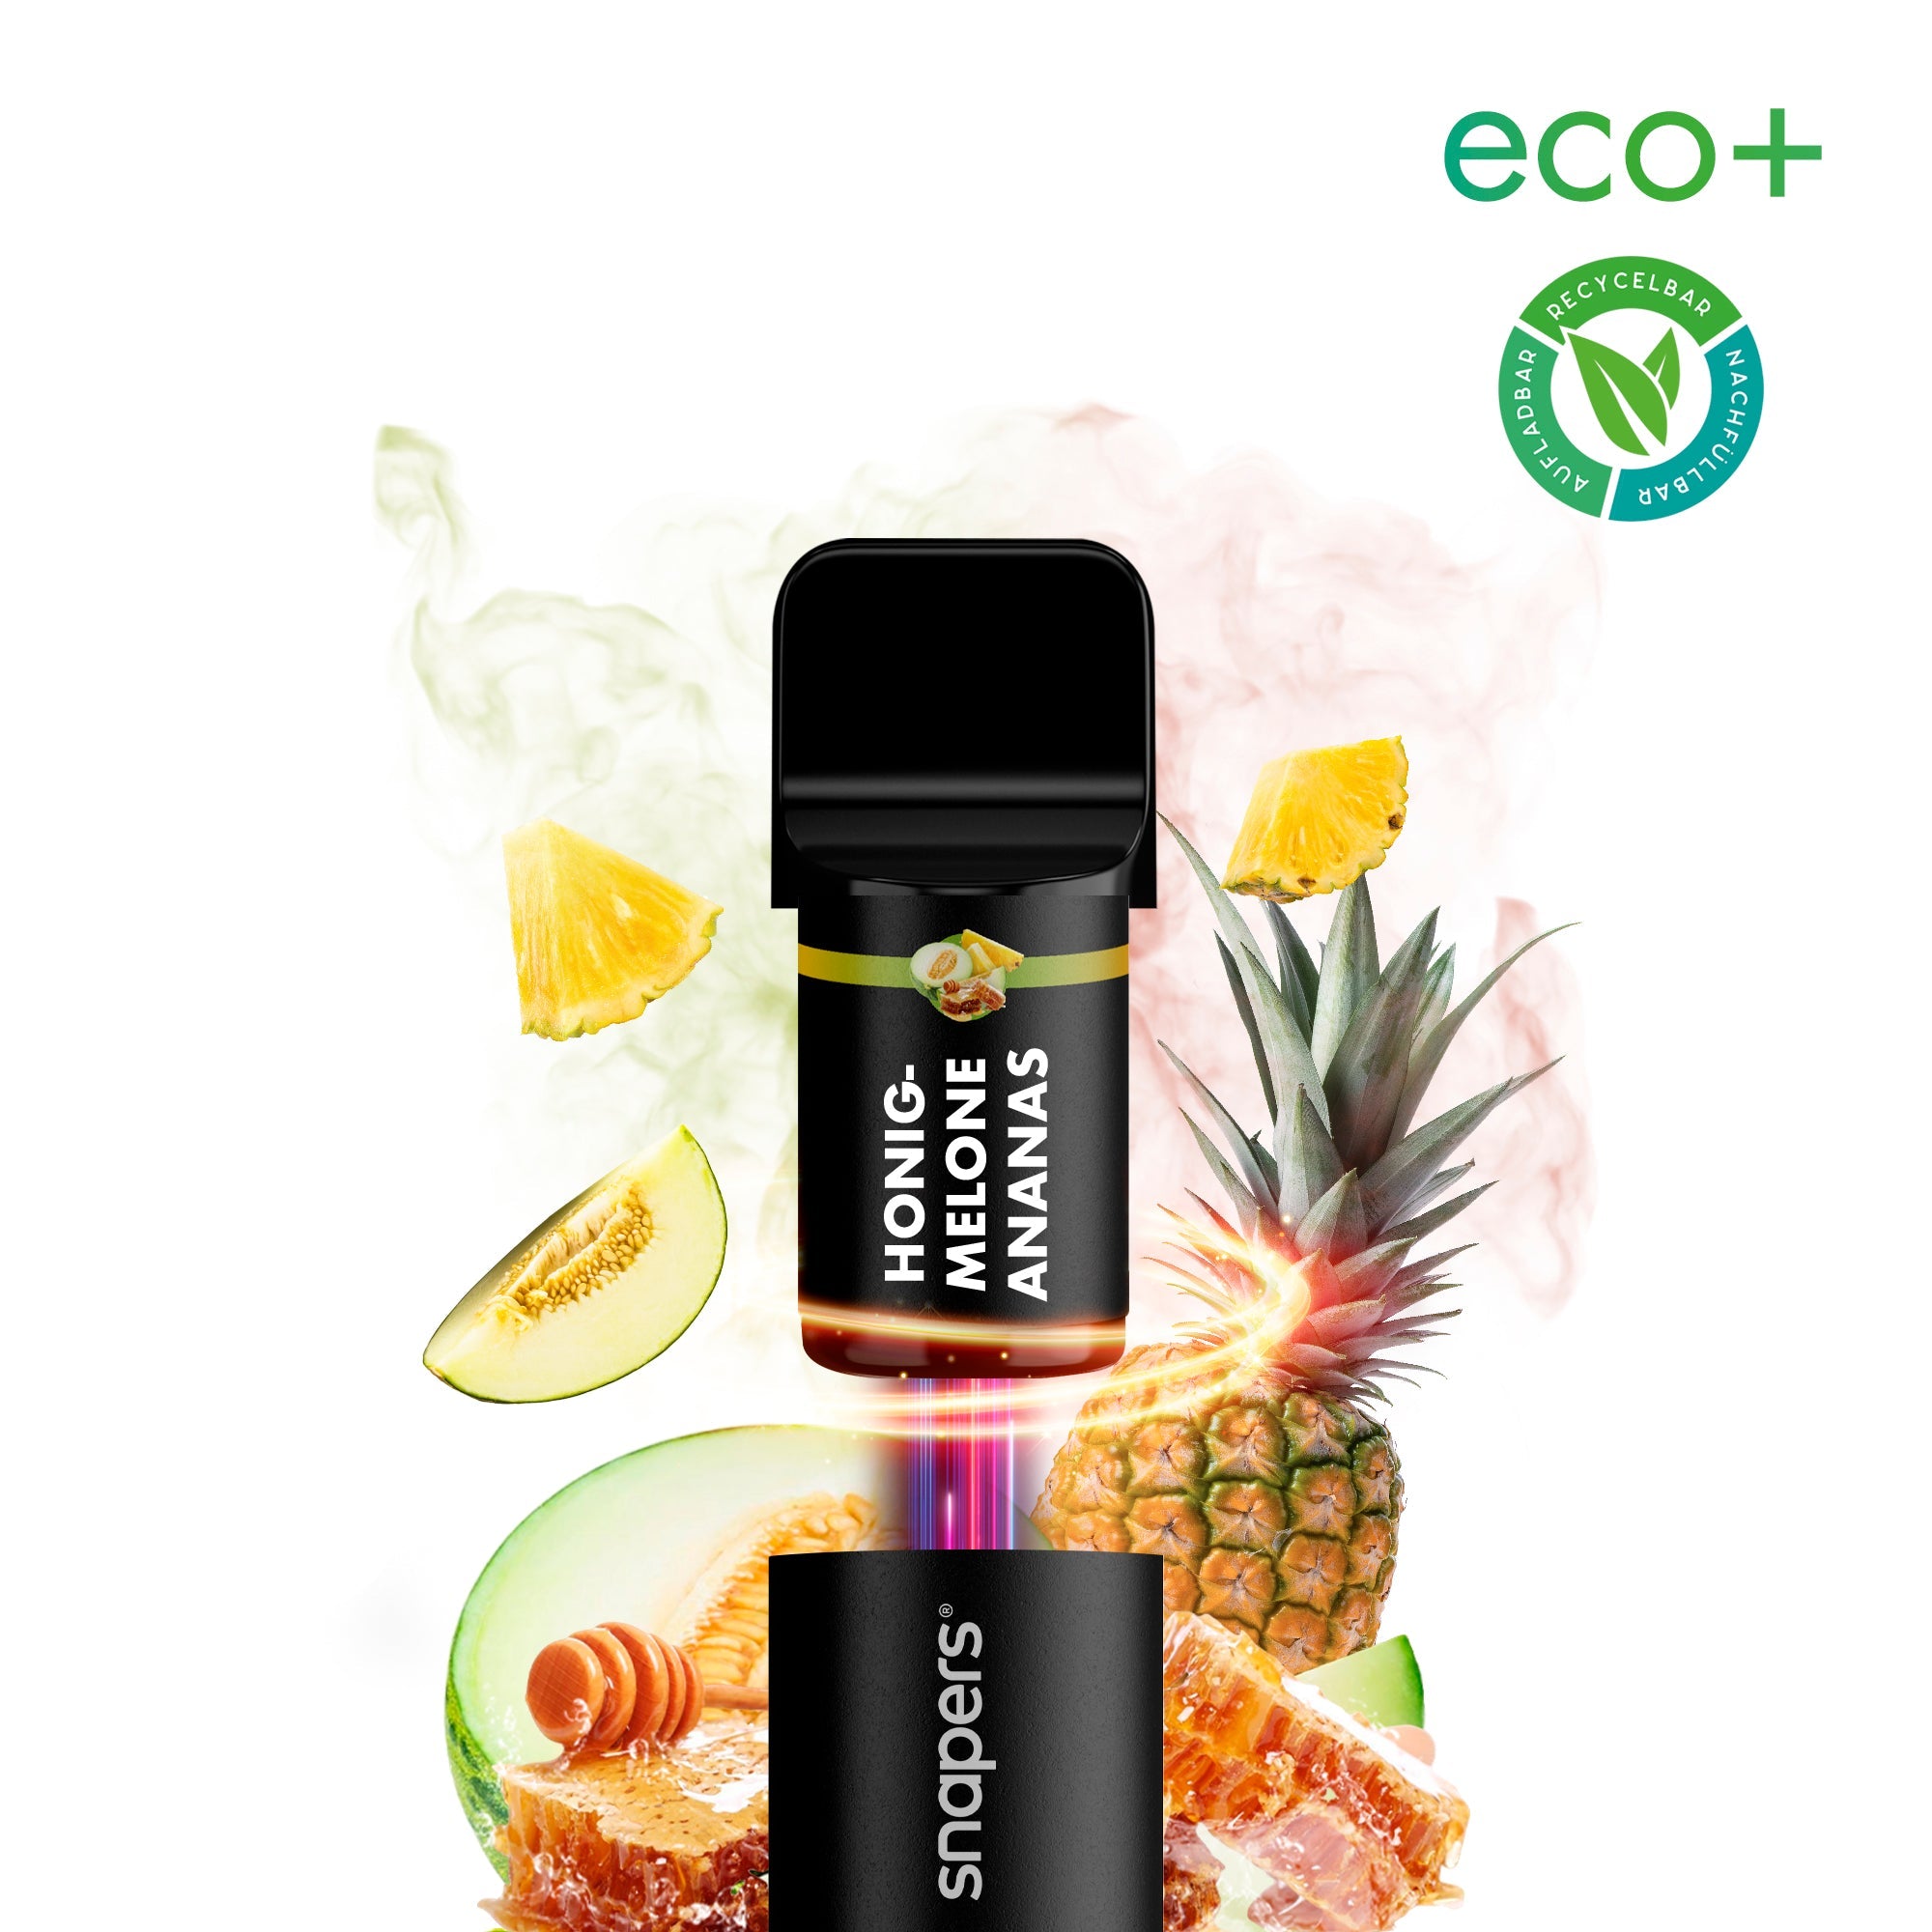 Snapers Eco+ 800 - Honigmelone Ananas